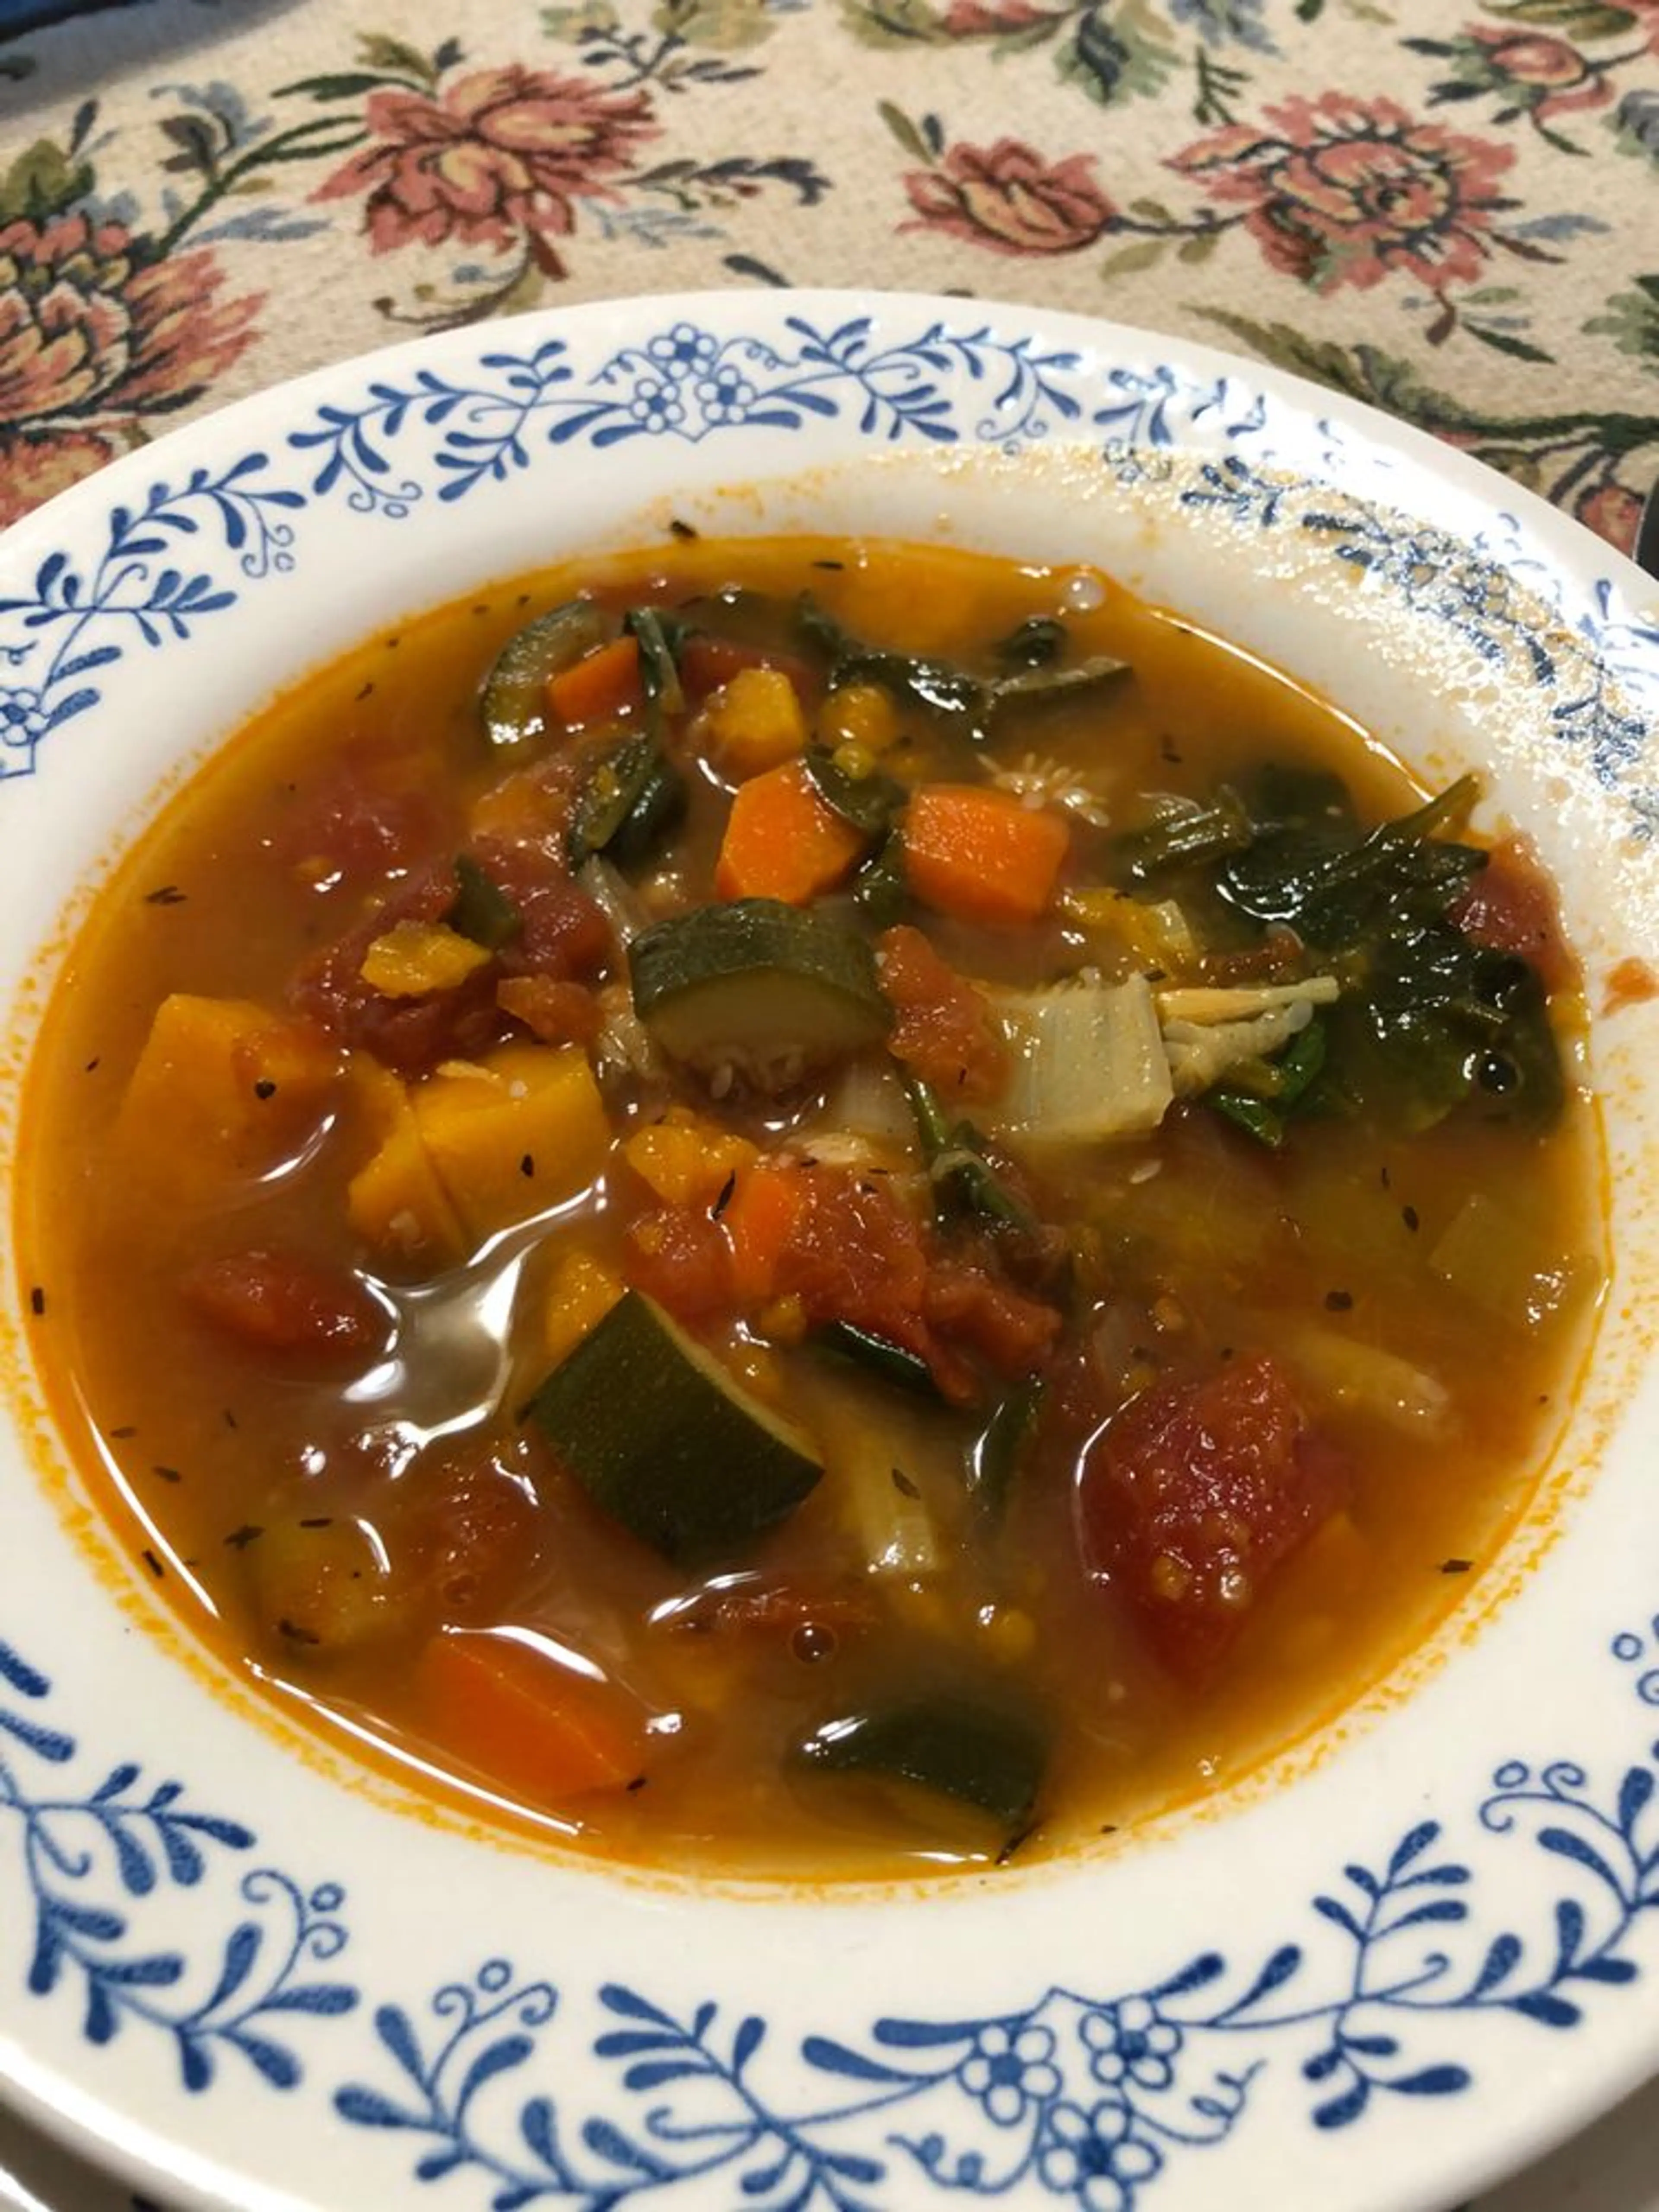 A HEALTHY SOUP FOR WEIGHT LOSS